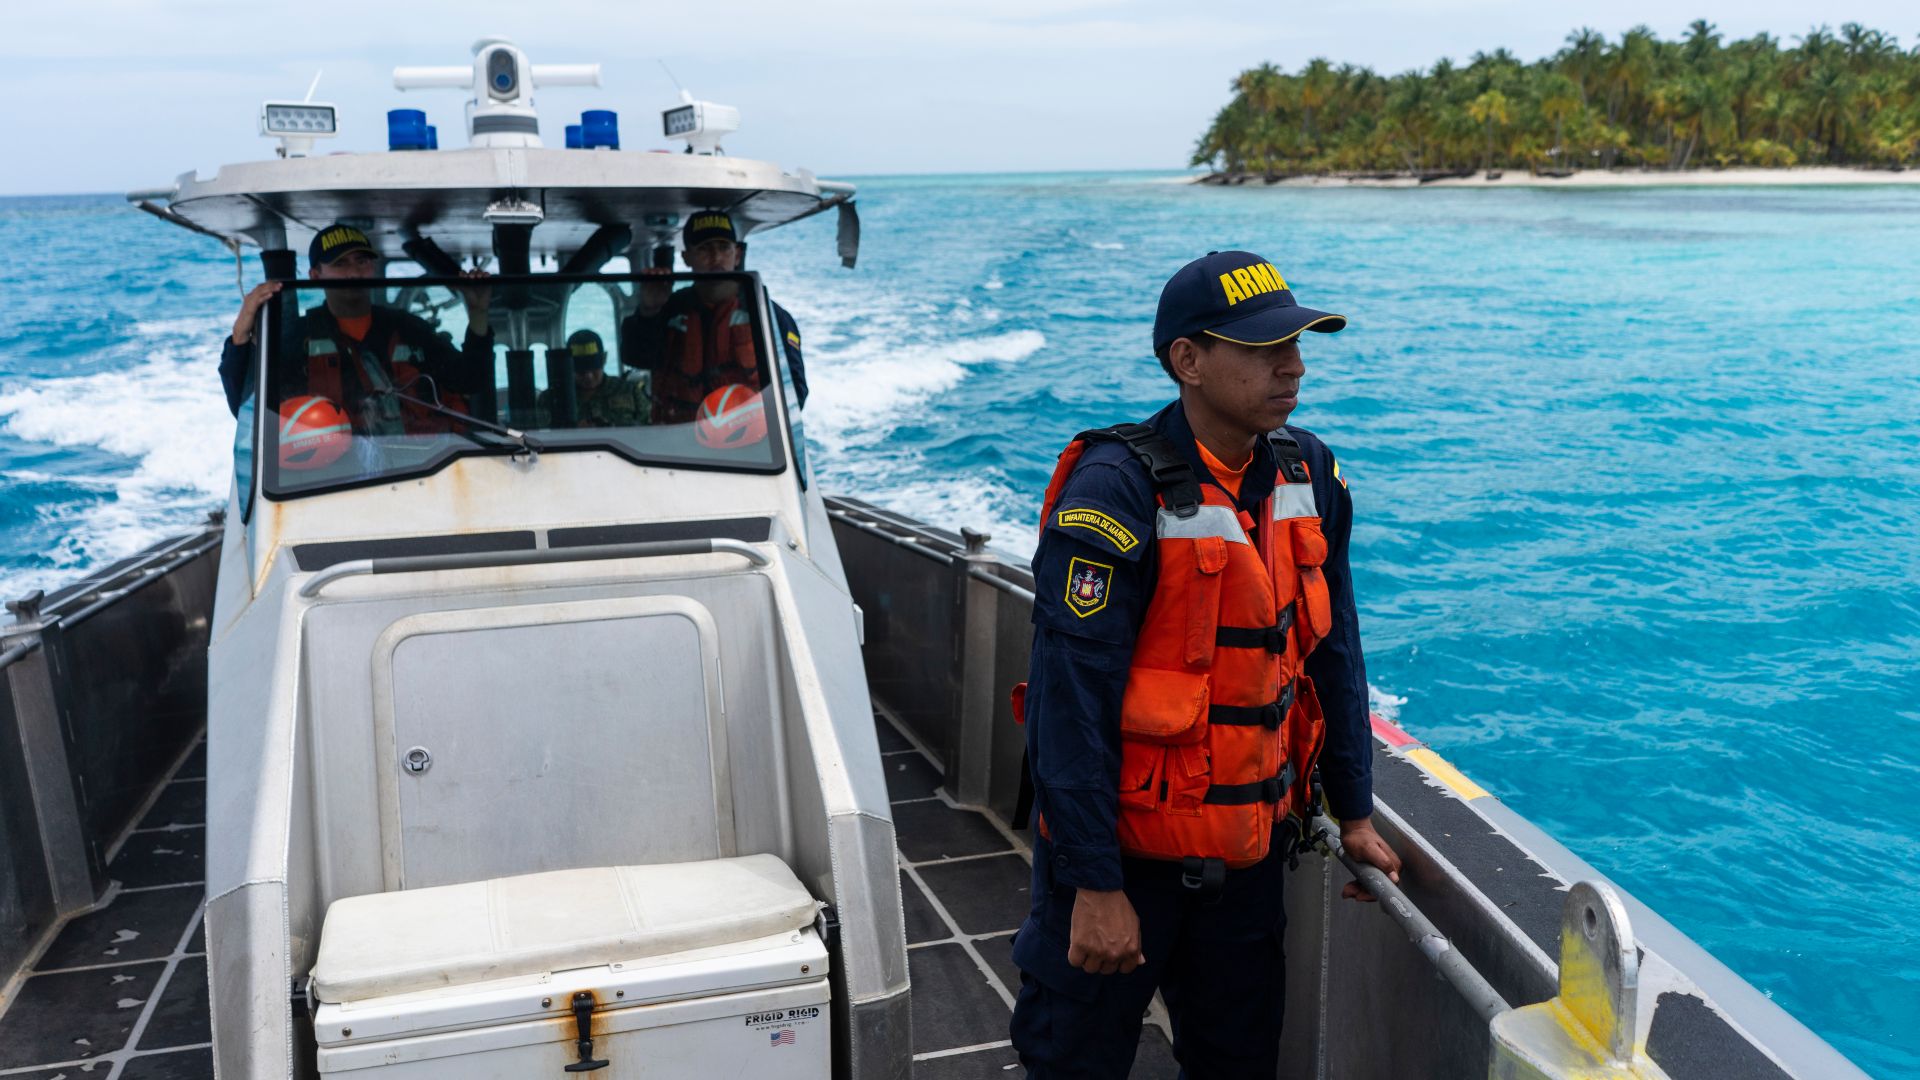 A Navy official, dressed in a ballcap, a long-sleeved uniform and an orange life vest stands aboard a boat that plies its way through the blue Caribbean waters.